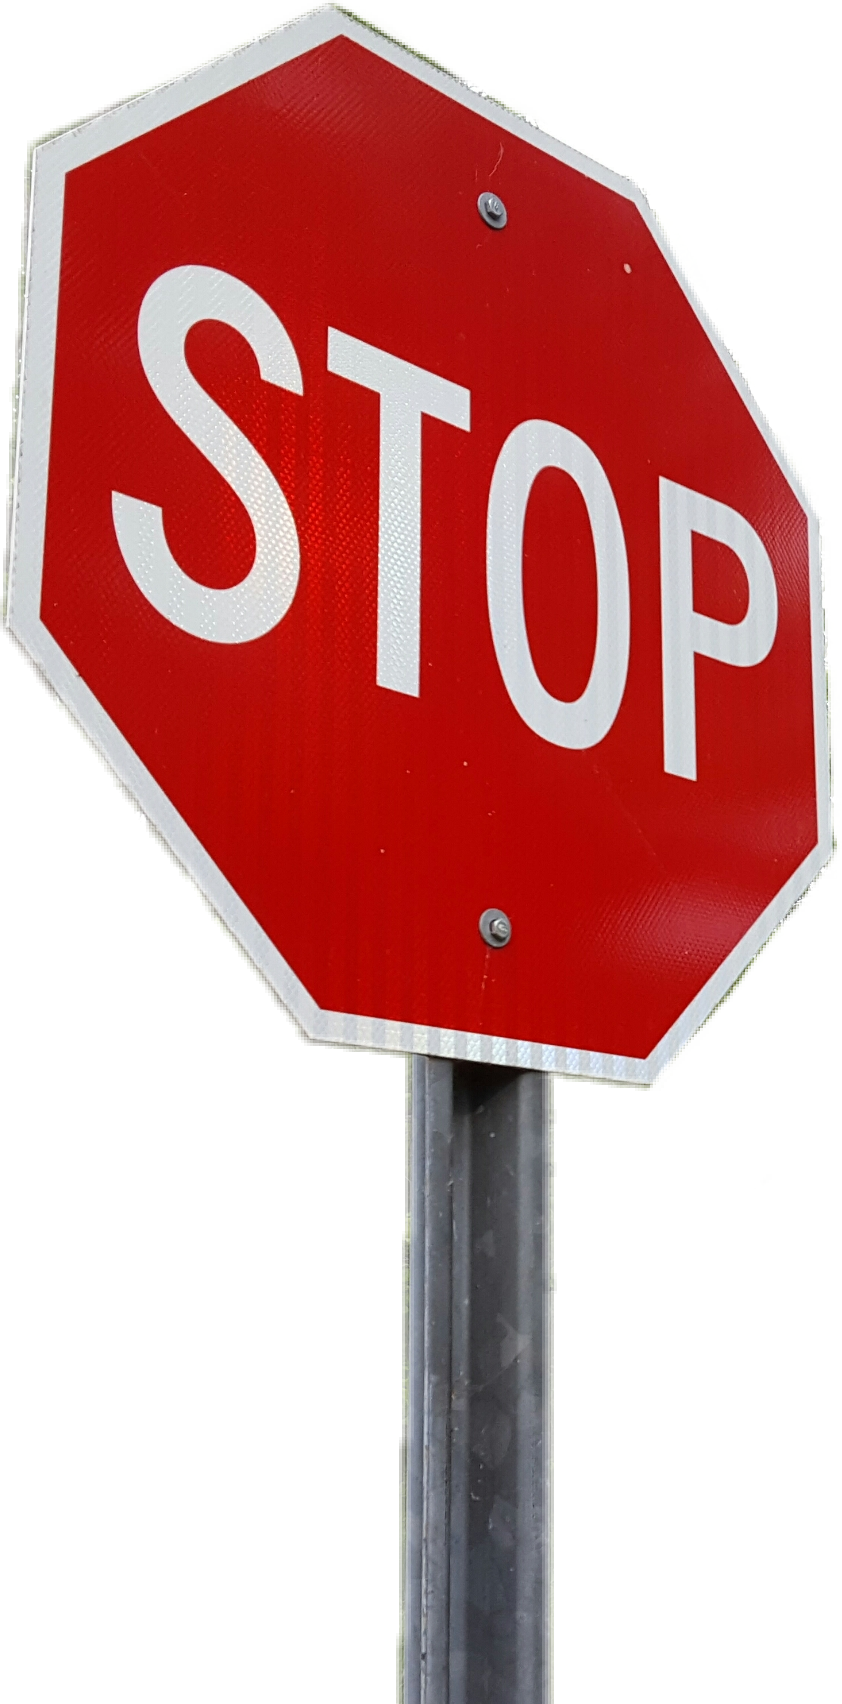 stop sign streetsigns trafficsign sticker by @mscoralrose